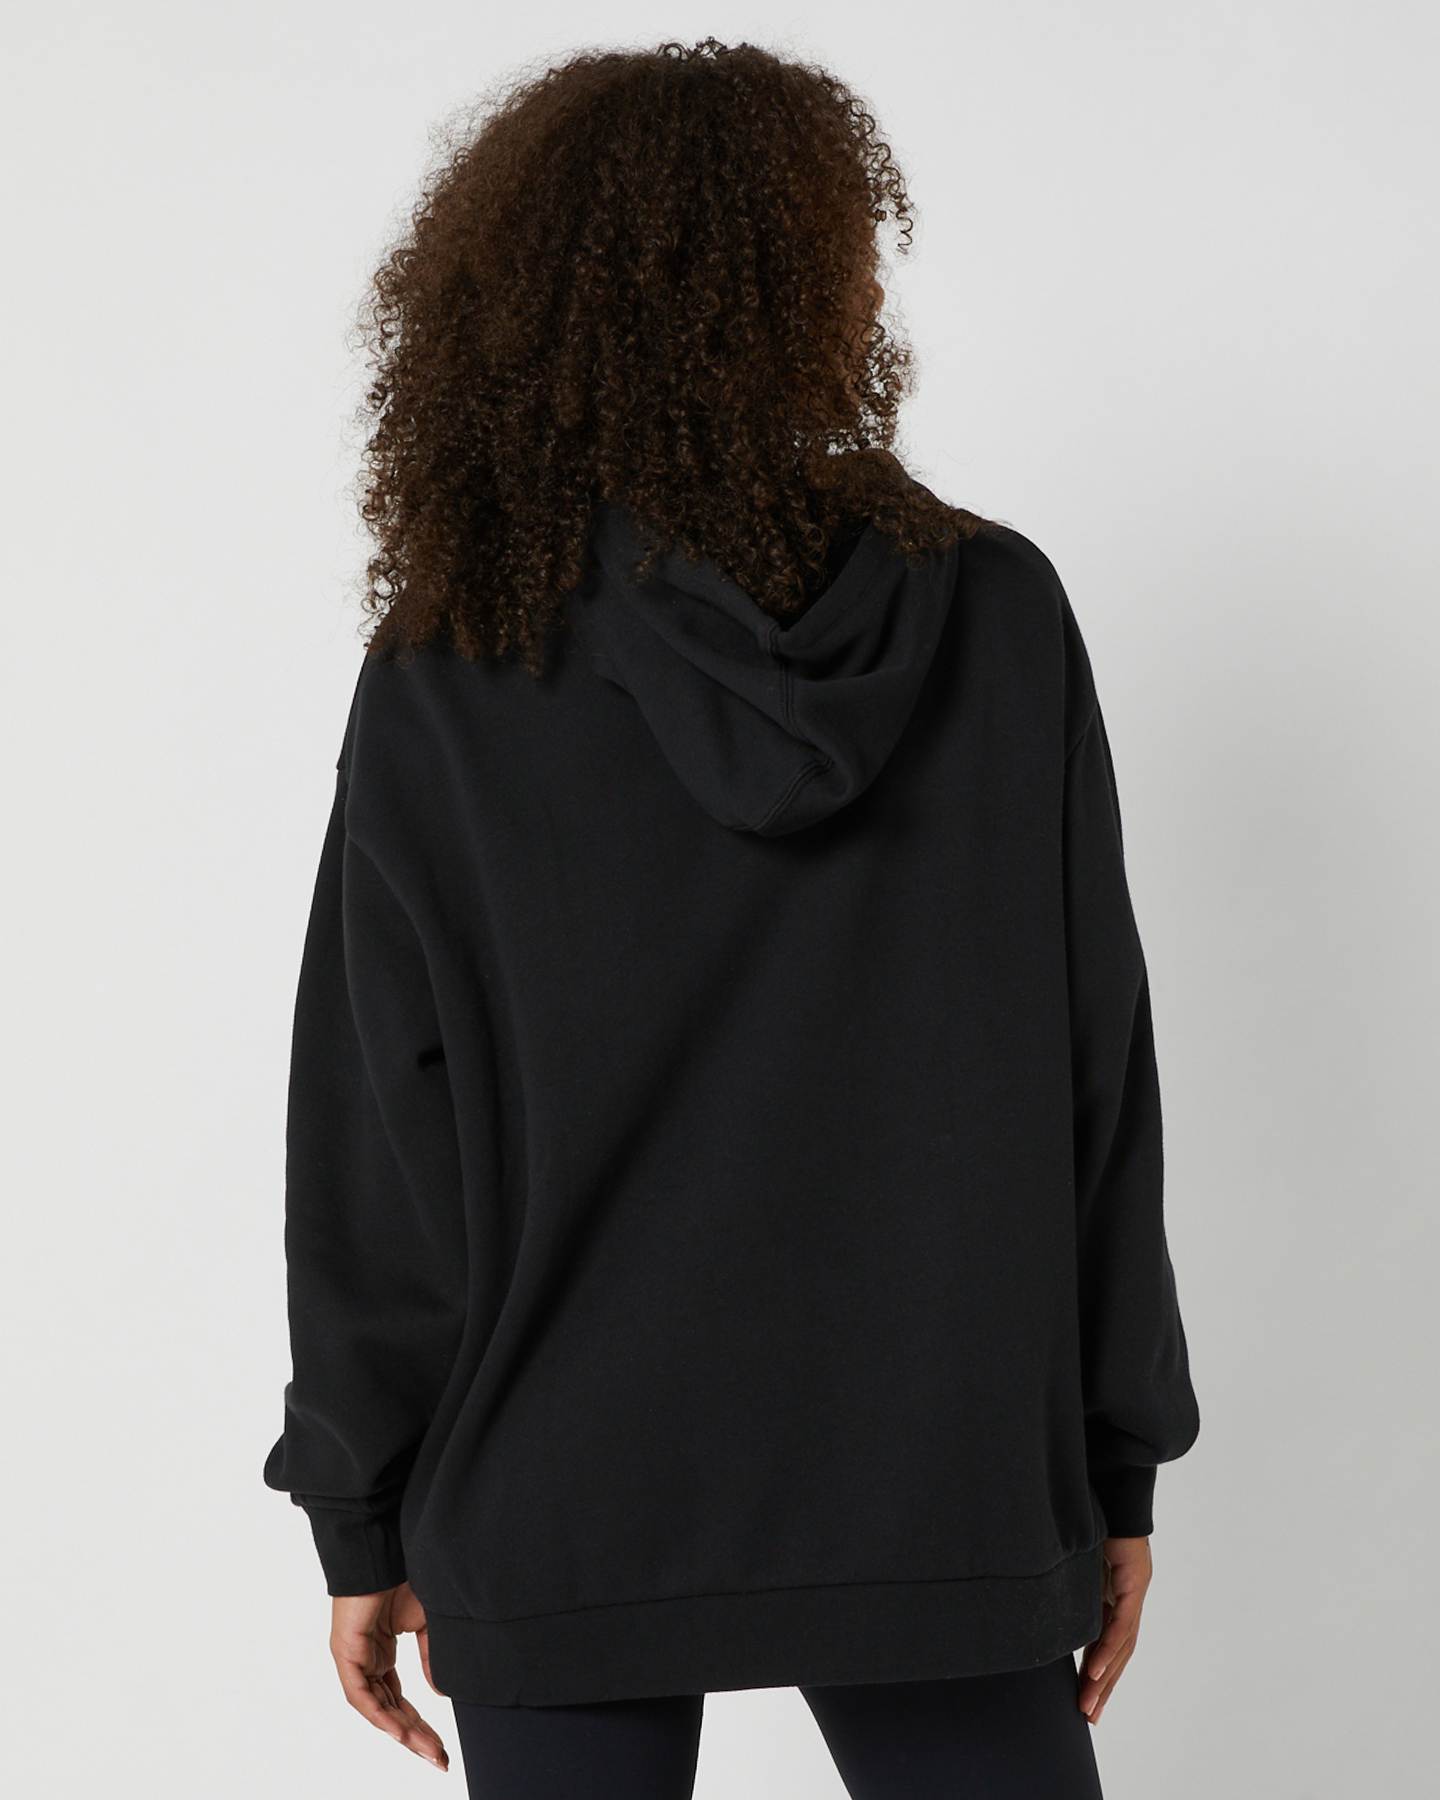 Hurley Alice Oversized Pullover - Black | SurfStitch